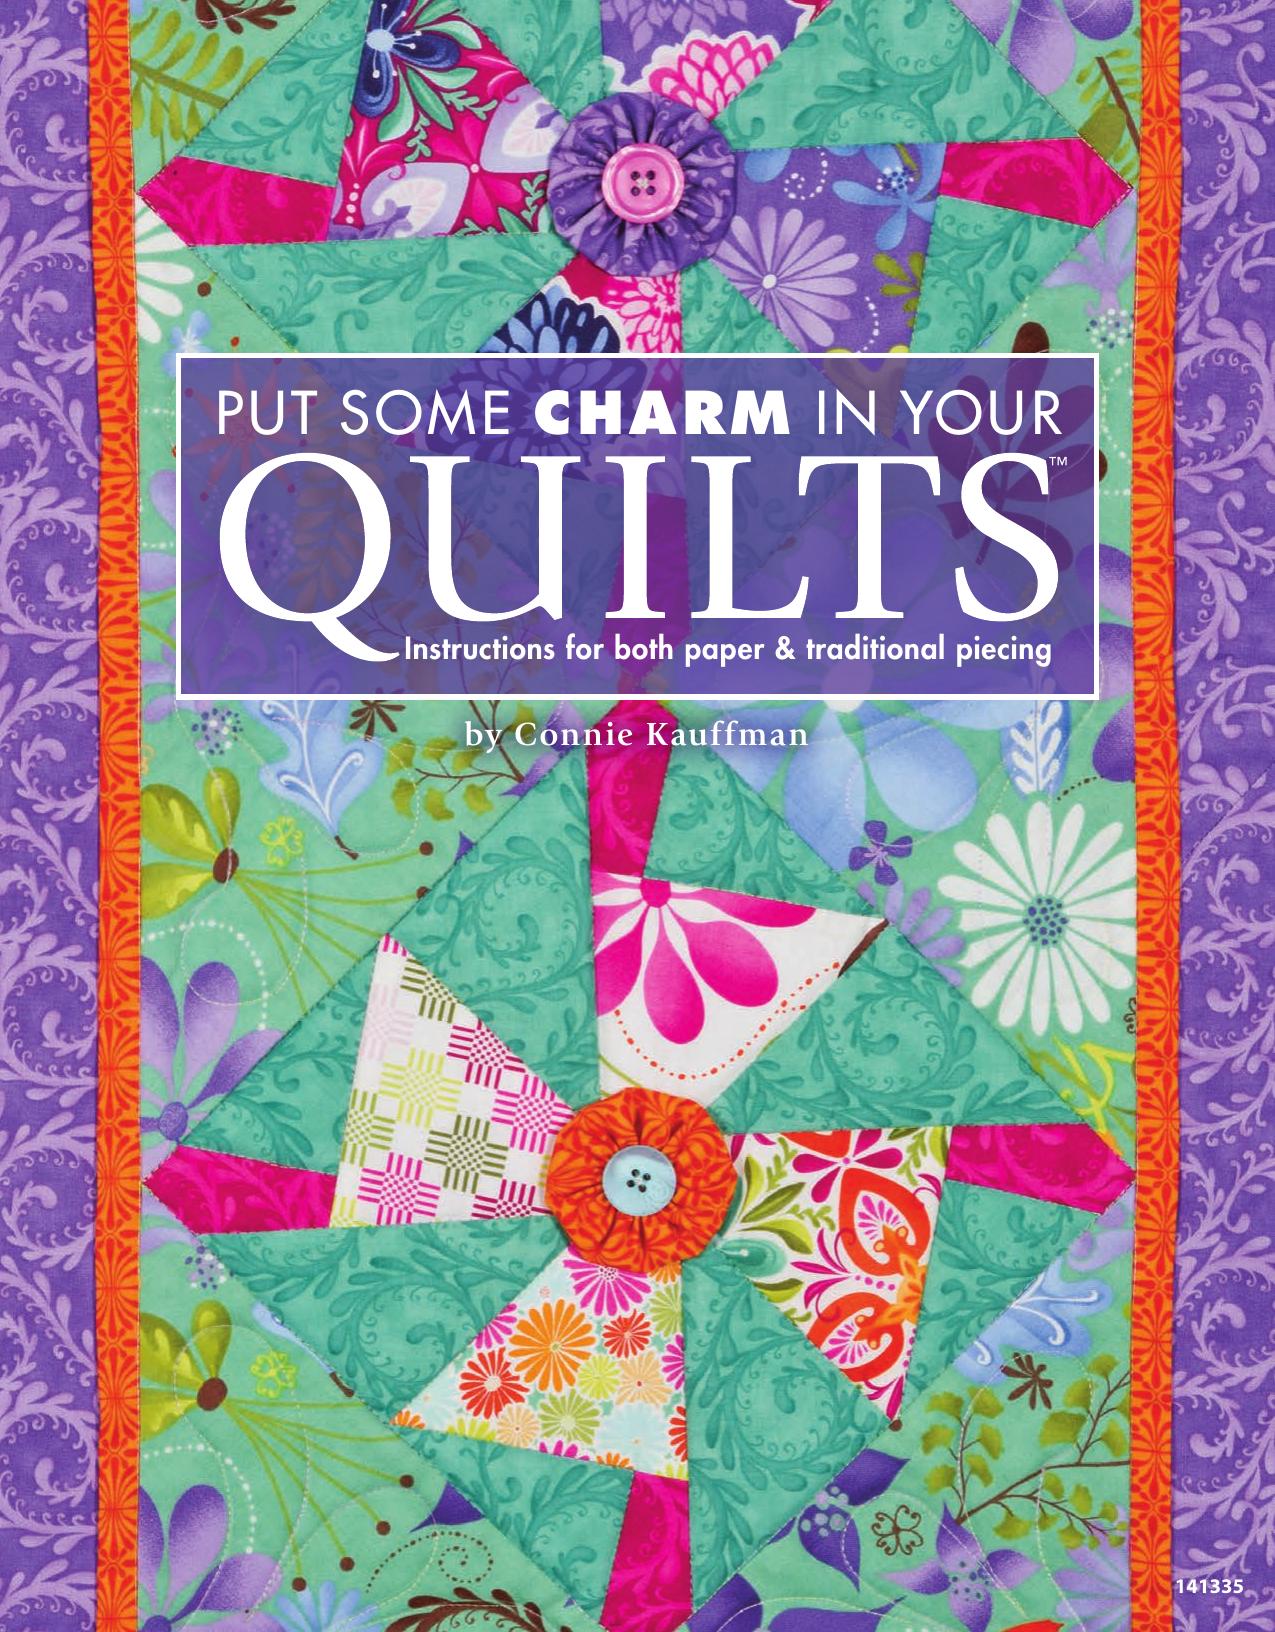 Put Some Charm in Your Quilts: Instructions for Both Paper & Traditional Piecing